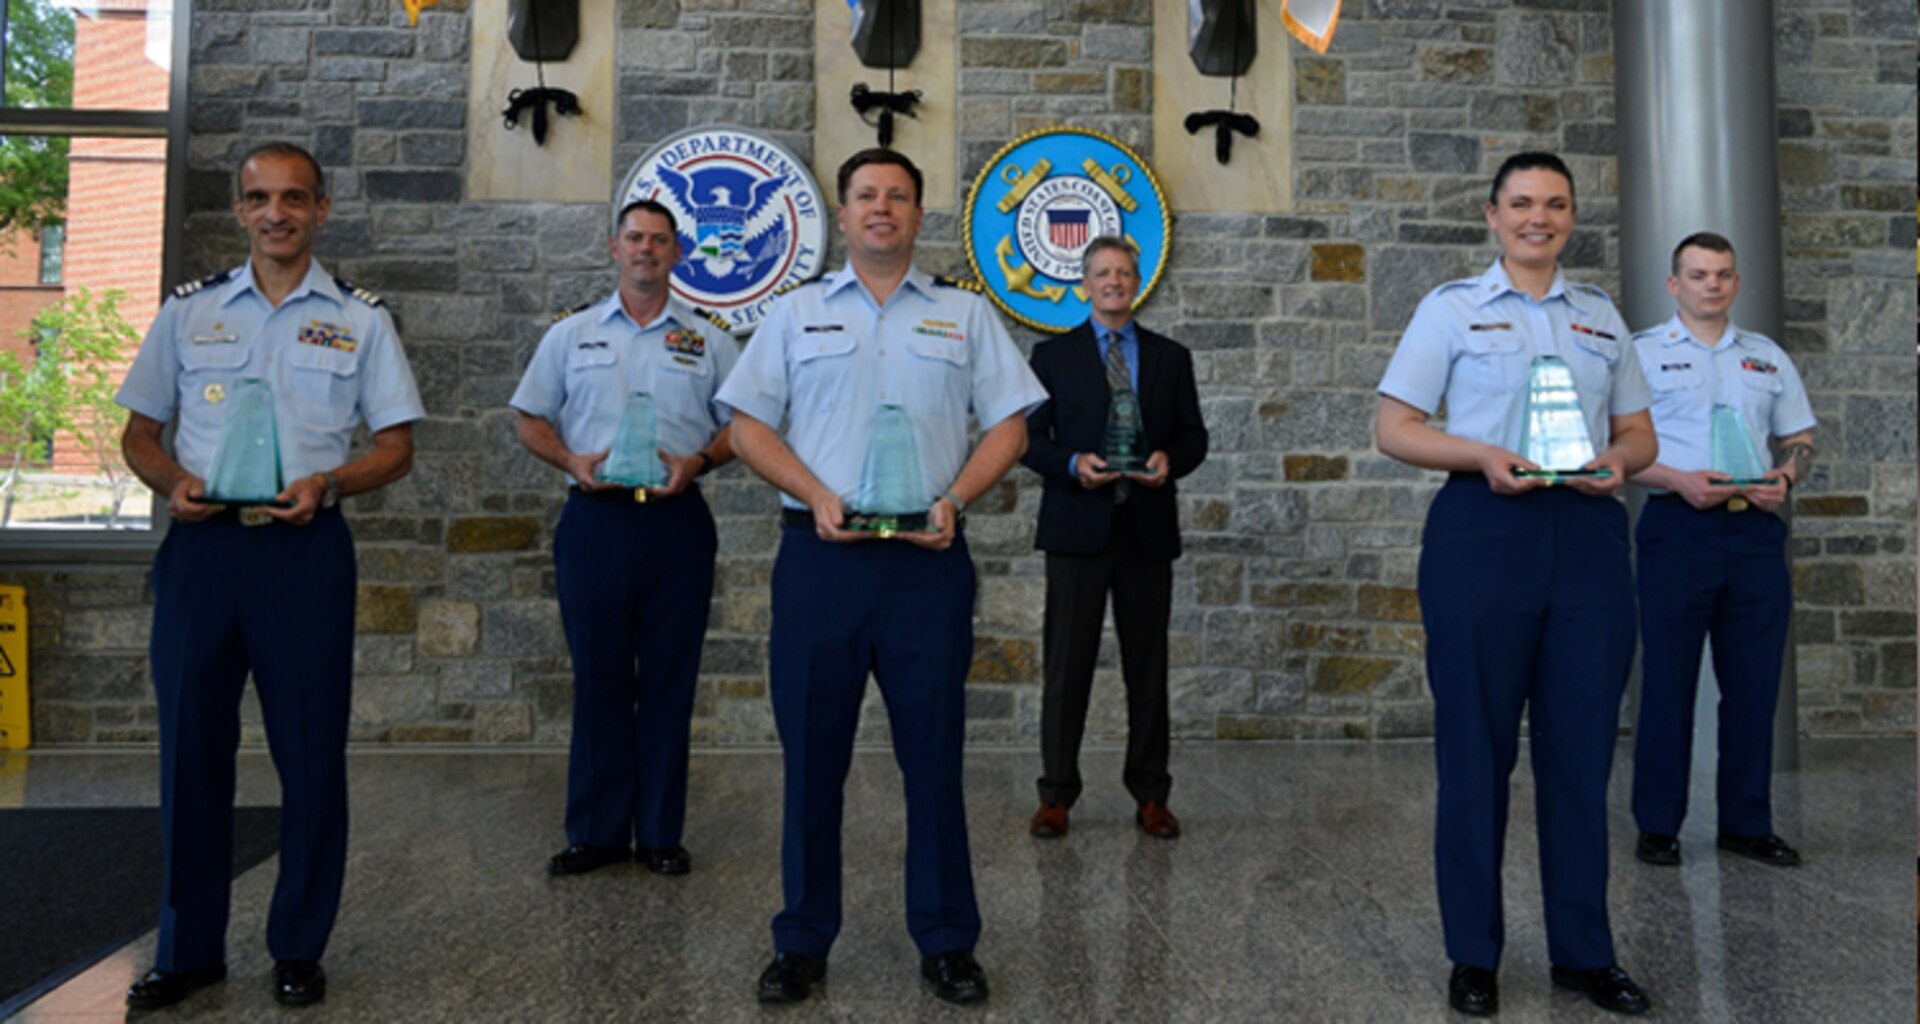 Representing the winners in each category of the 2020 Capt. Niels P. Thomsen Innovation Awards are, from left, Auxiliarist Alvaro Ferrando, Cmdr. Joel Carse, Cmdr. Baxter Smoak, Douglas Campbell, Petty Officer 3rd Class Kristin Talbott and Petty Officer 1st Class James Lenkiewicz.